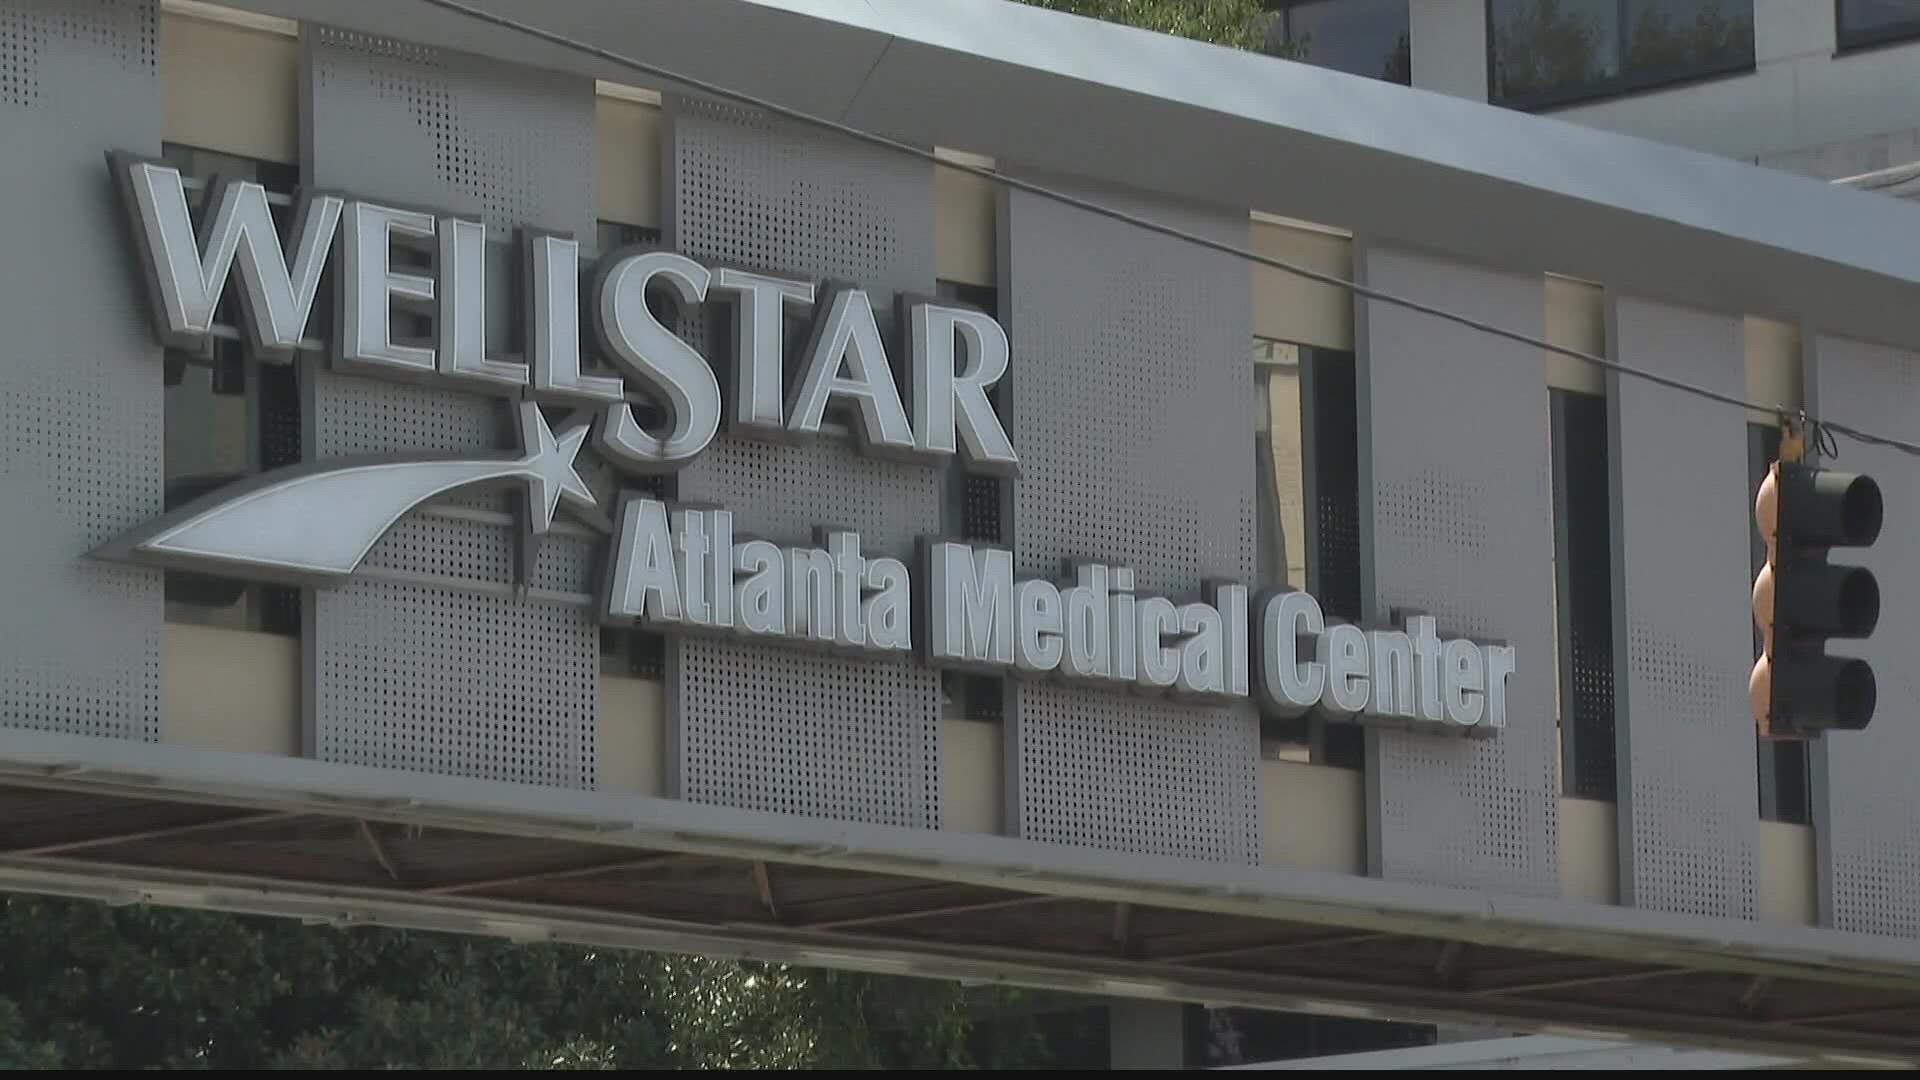 It's been less than 24 hours since Atlanta Medical Center started to divert ambulances from its emergency room.